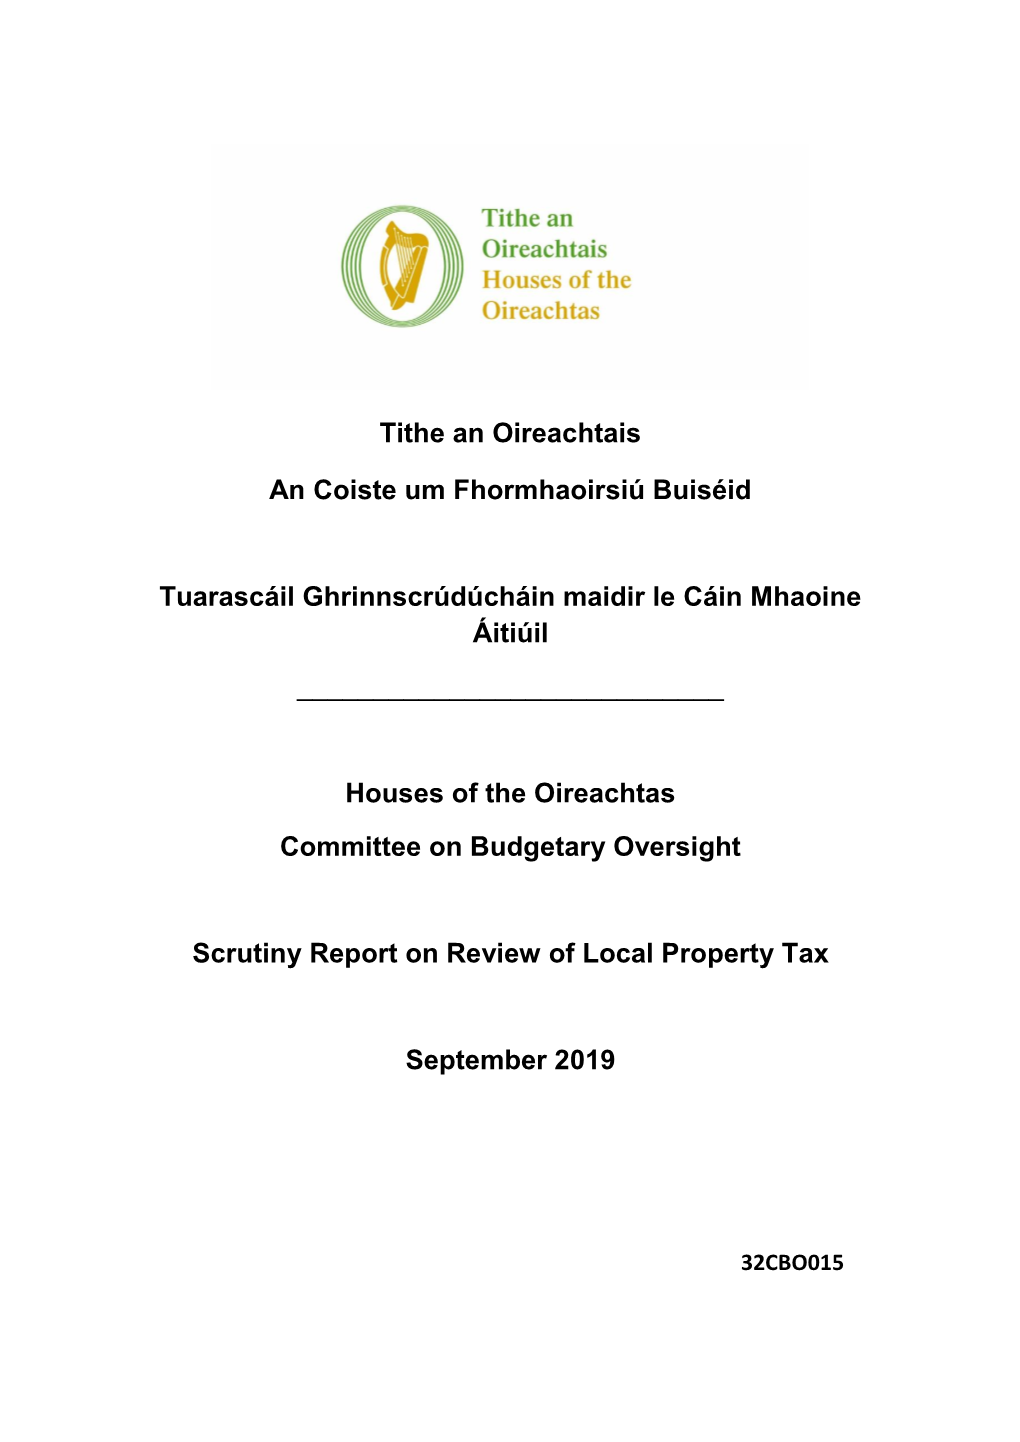 Scrutiny Report on Review of Local Property Tax